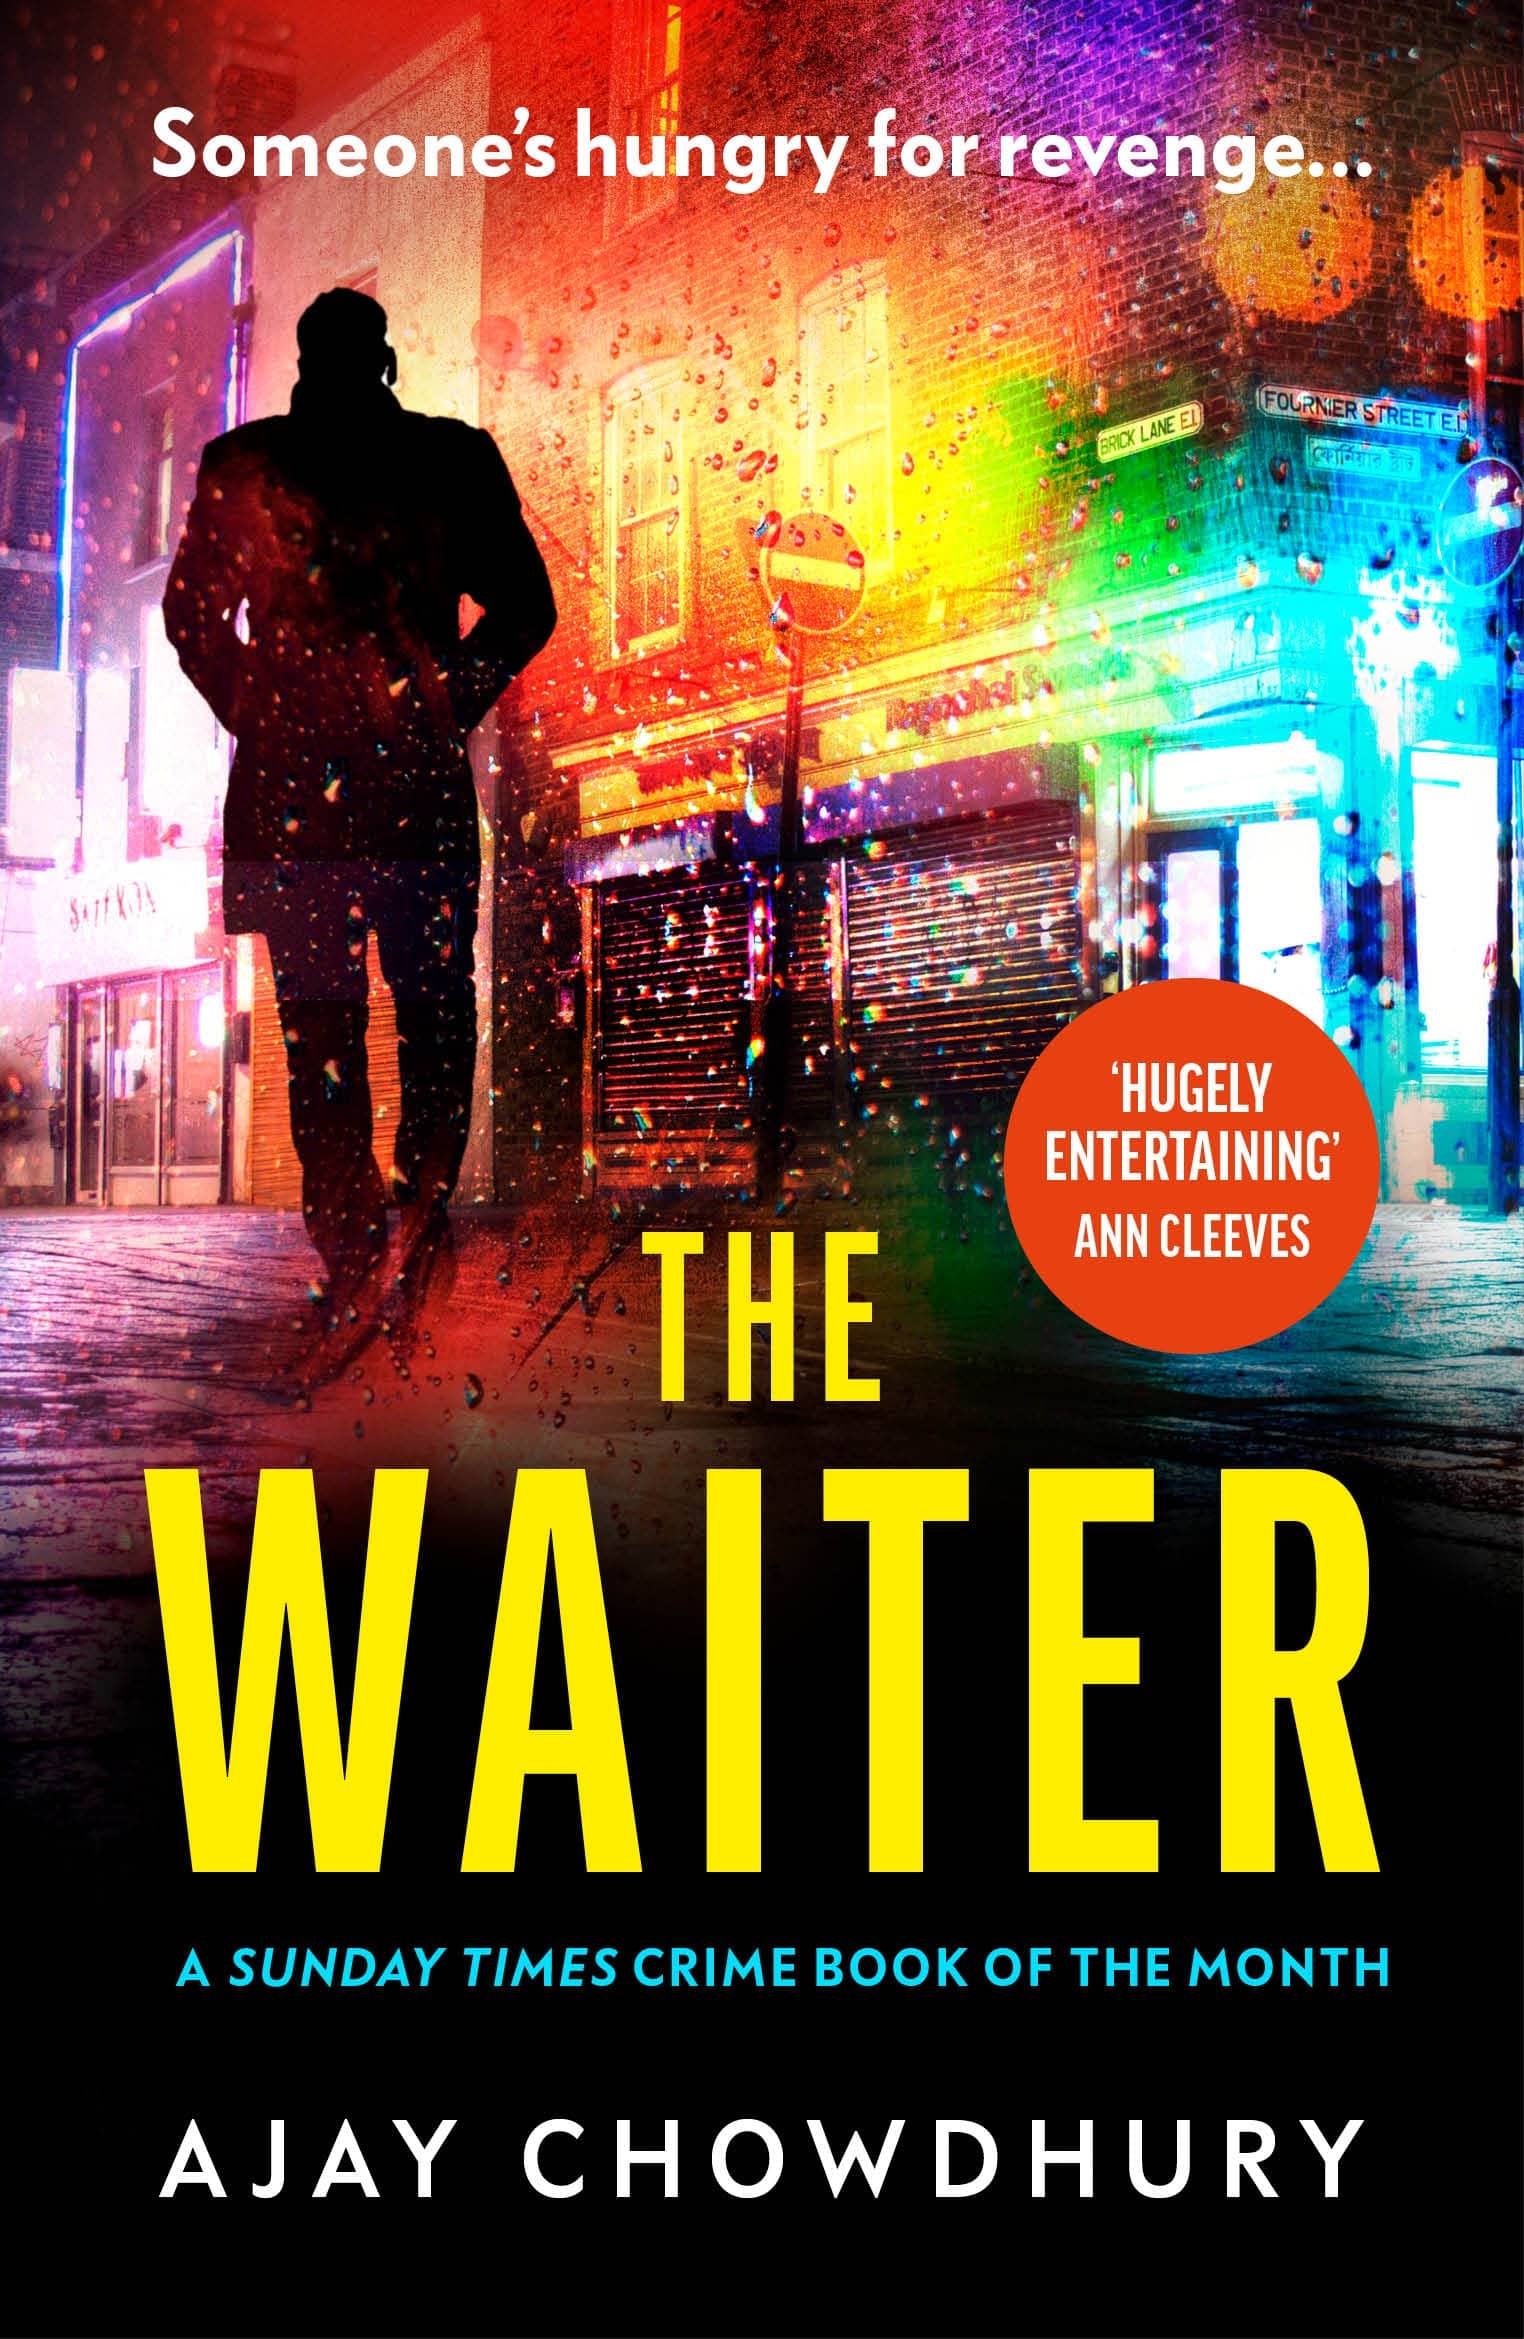 Book cover of The Waiter by Ajay Chowdhury